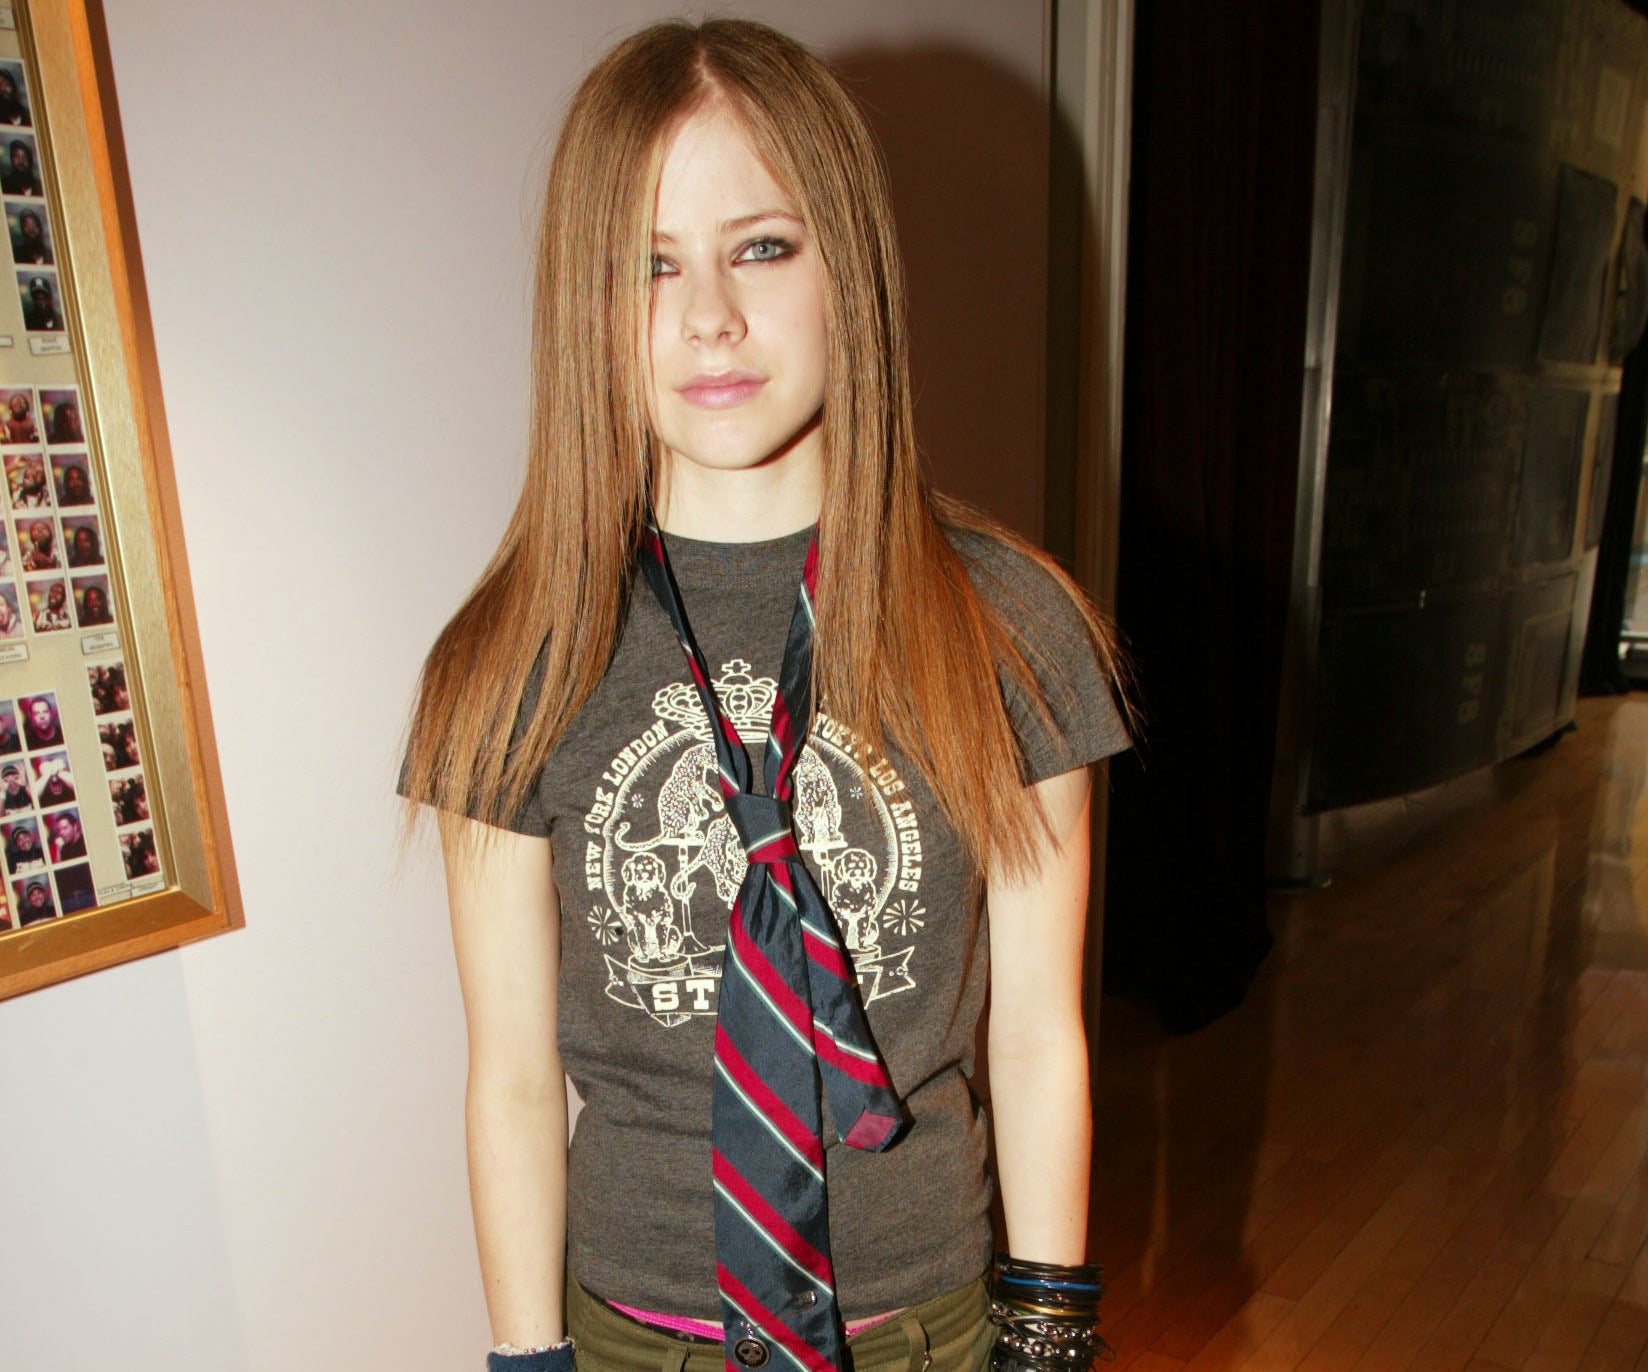 Avril wears a similar tie on top of a T-shirt back in 2002